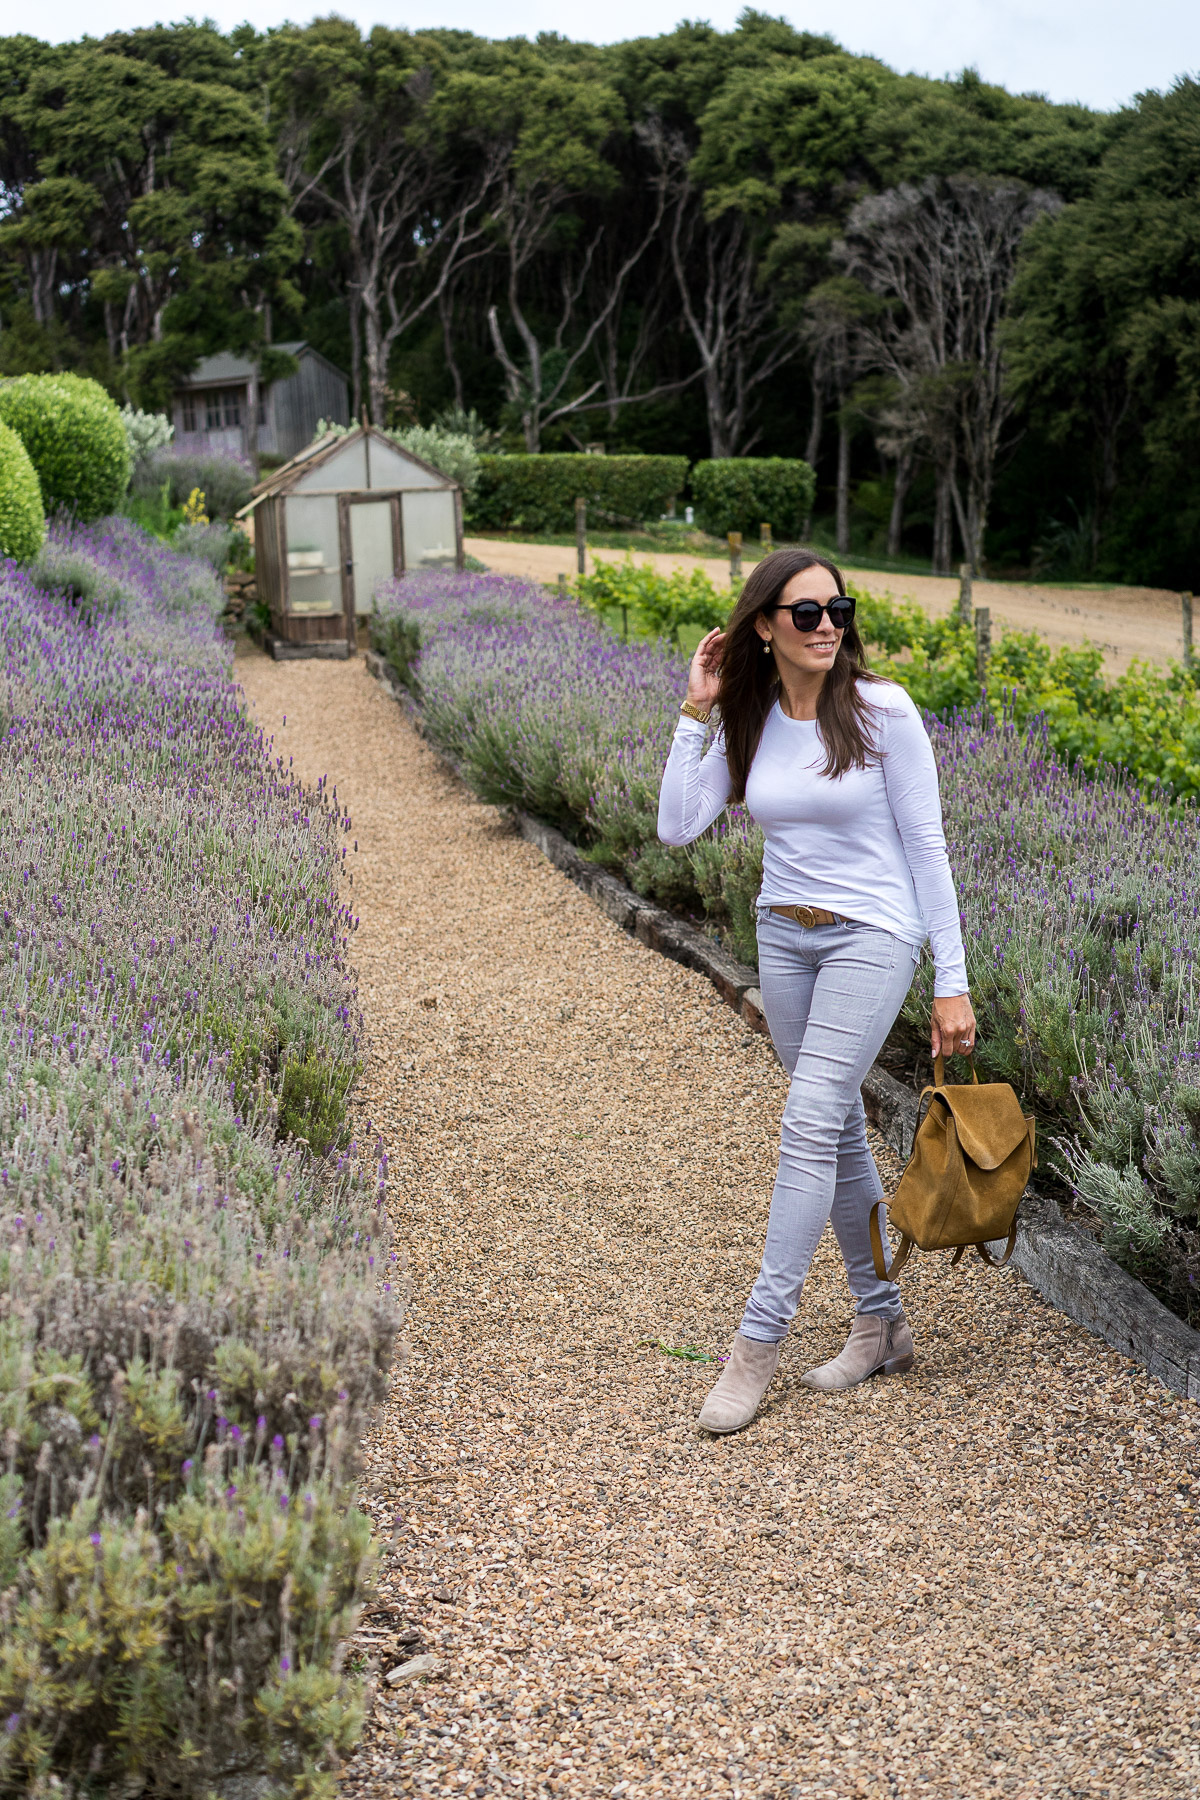 South Florida fashion blogger Amanda from A Glam Lifestyle shares the top things to do in Waiheke Island including Waiheke Island wineries